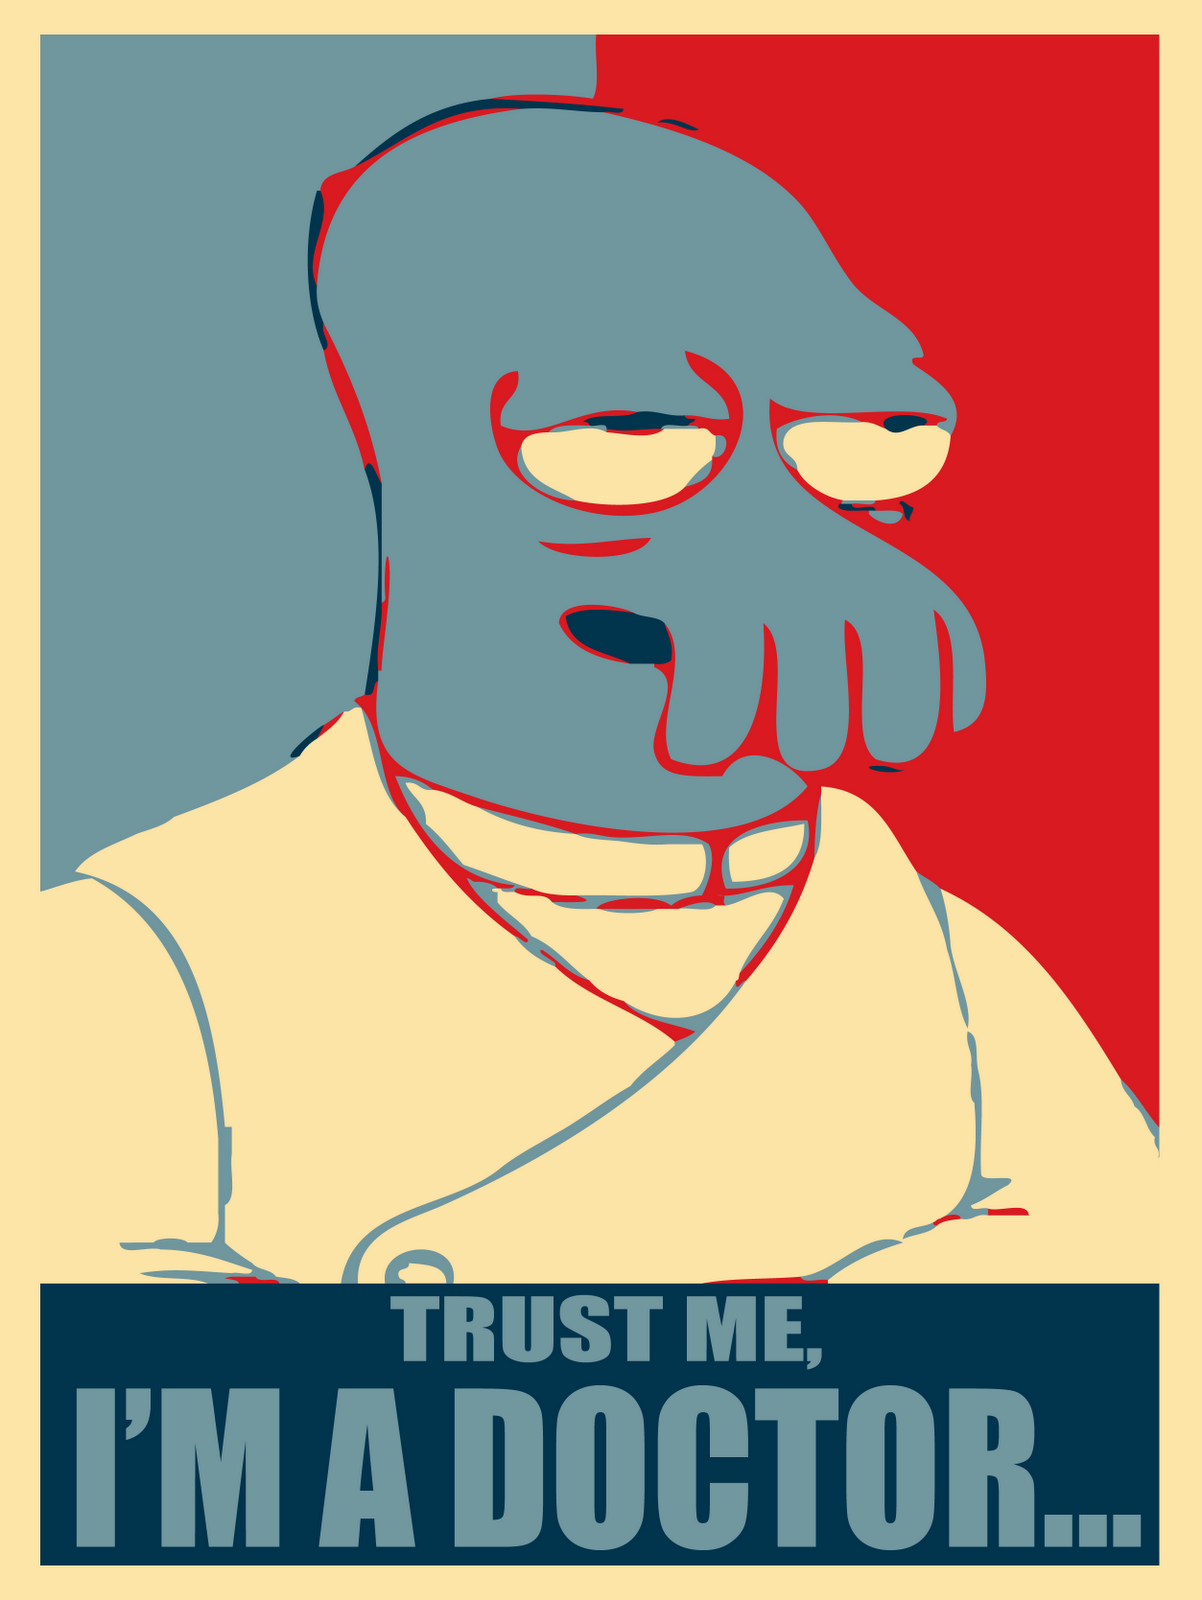 Gfest: Now Zoidberg is the Popular One - Best Dr. Zoidberg Halloween ...